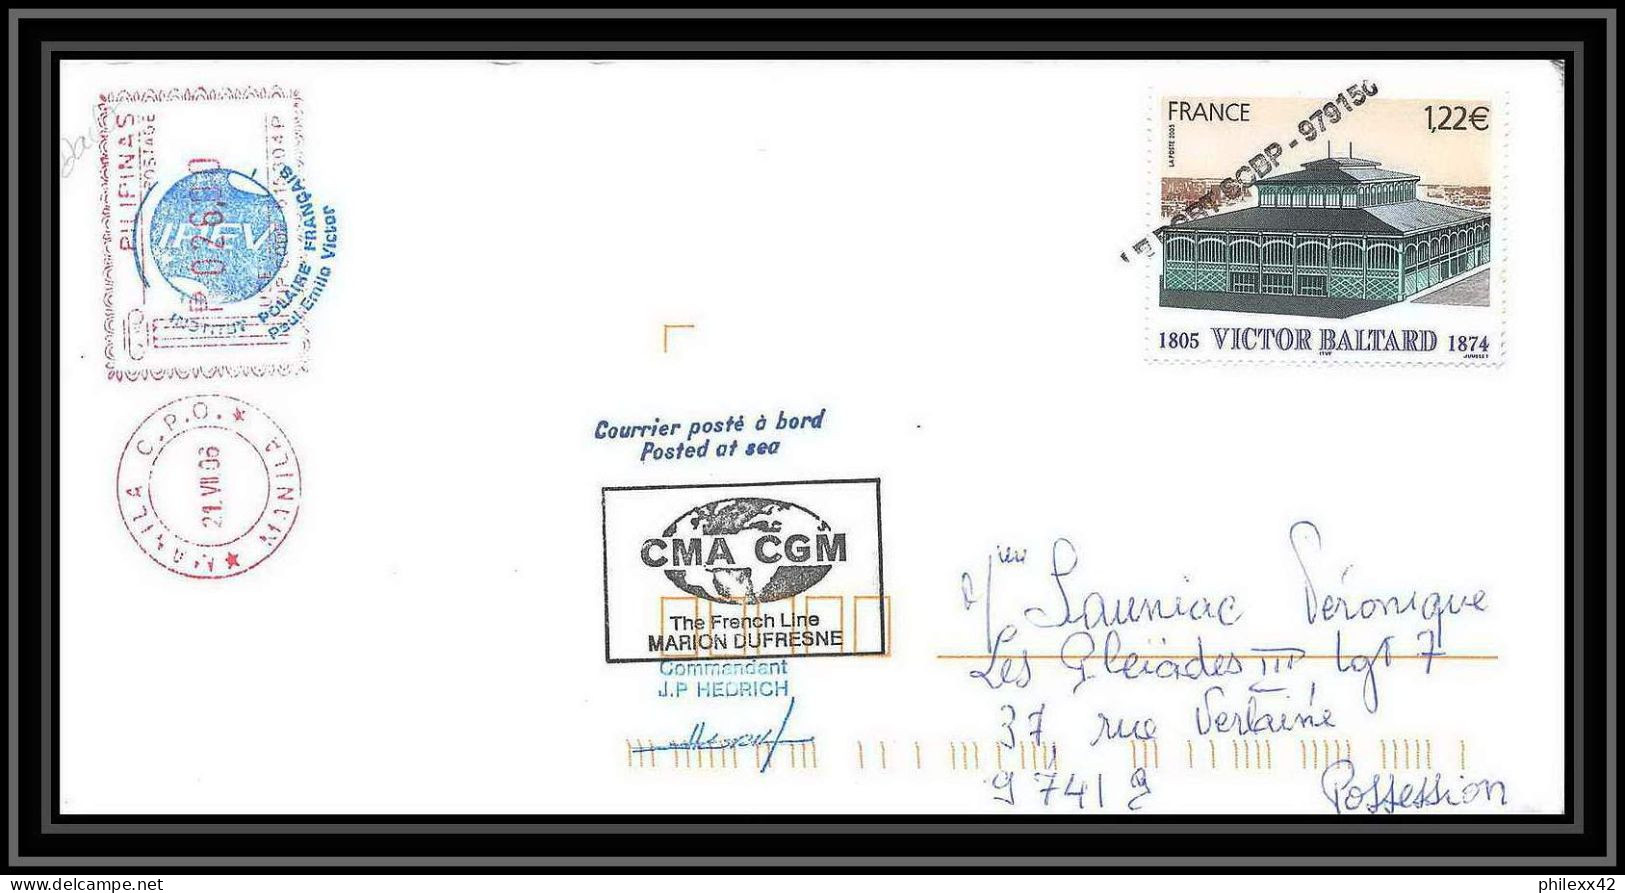 2591 ANTARCTIC Taaf Philippines Pilipinas Mixte Lettre Cover Dufresne 2 Signé Signed Md 155 Marco Polo 2 2006 Papillons - Spedizioni Antartiche